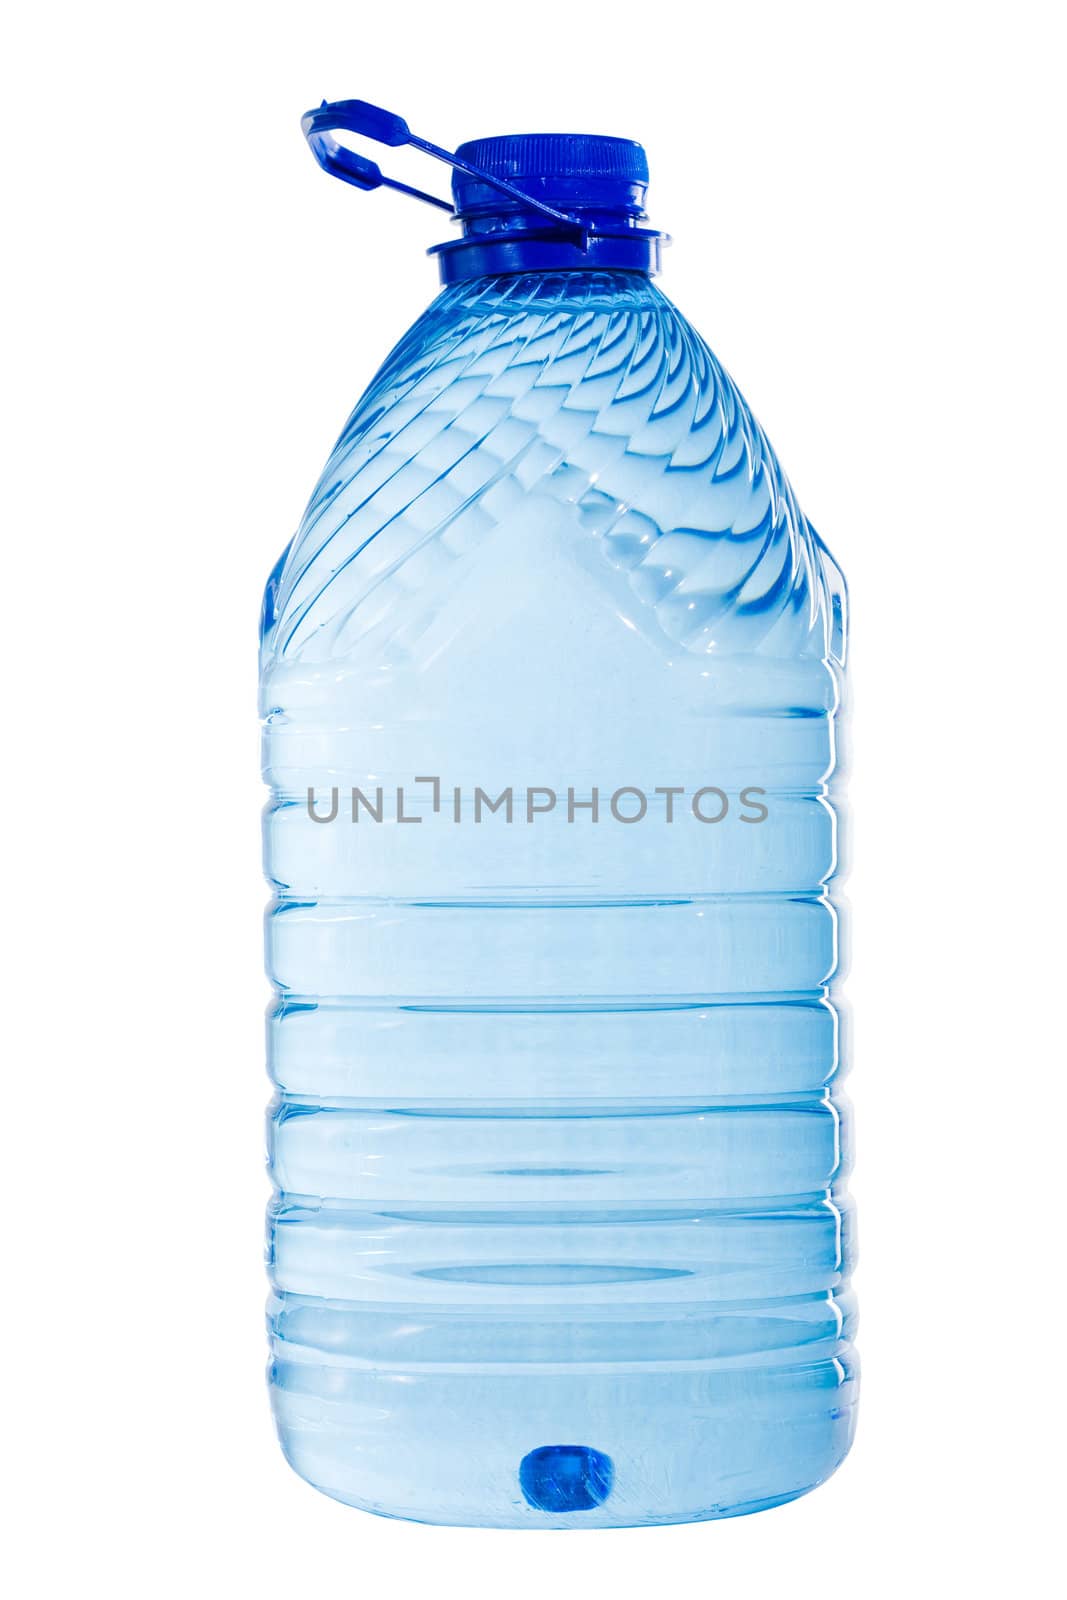 Stock photo: an image of a big blue bottle with water